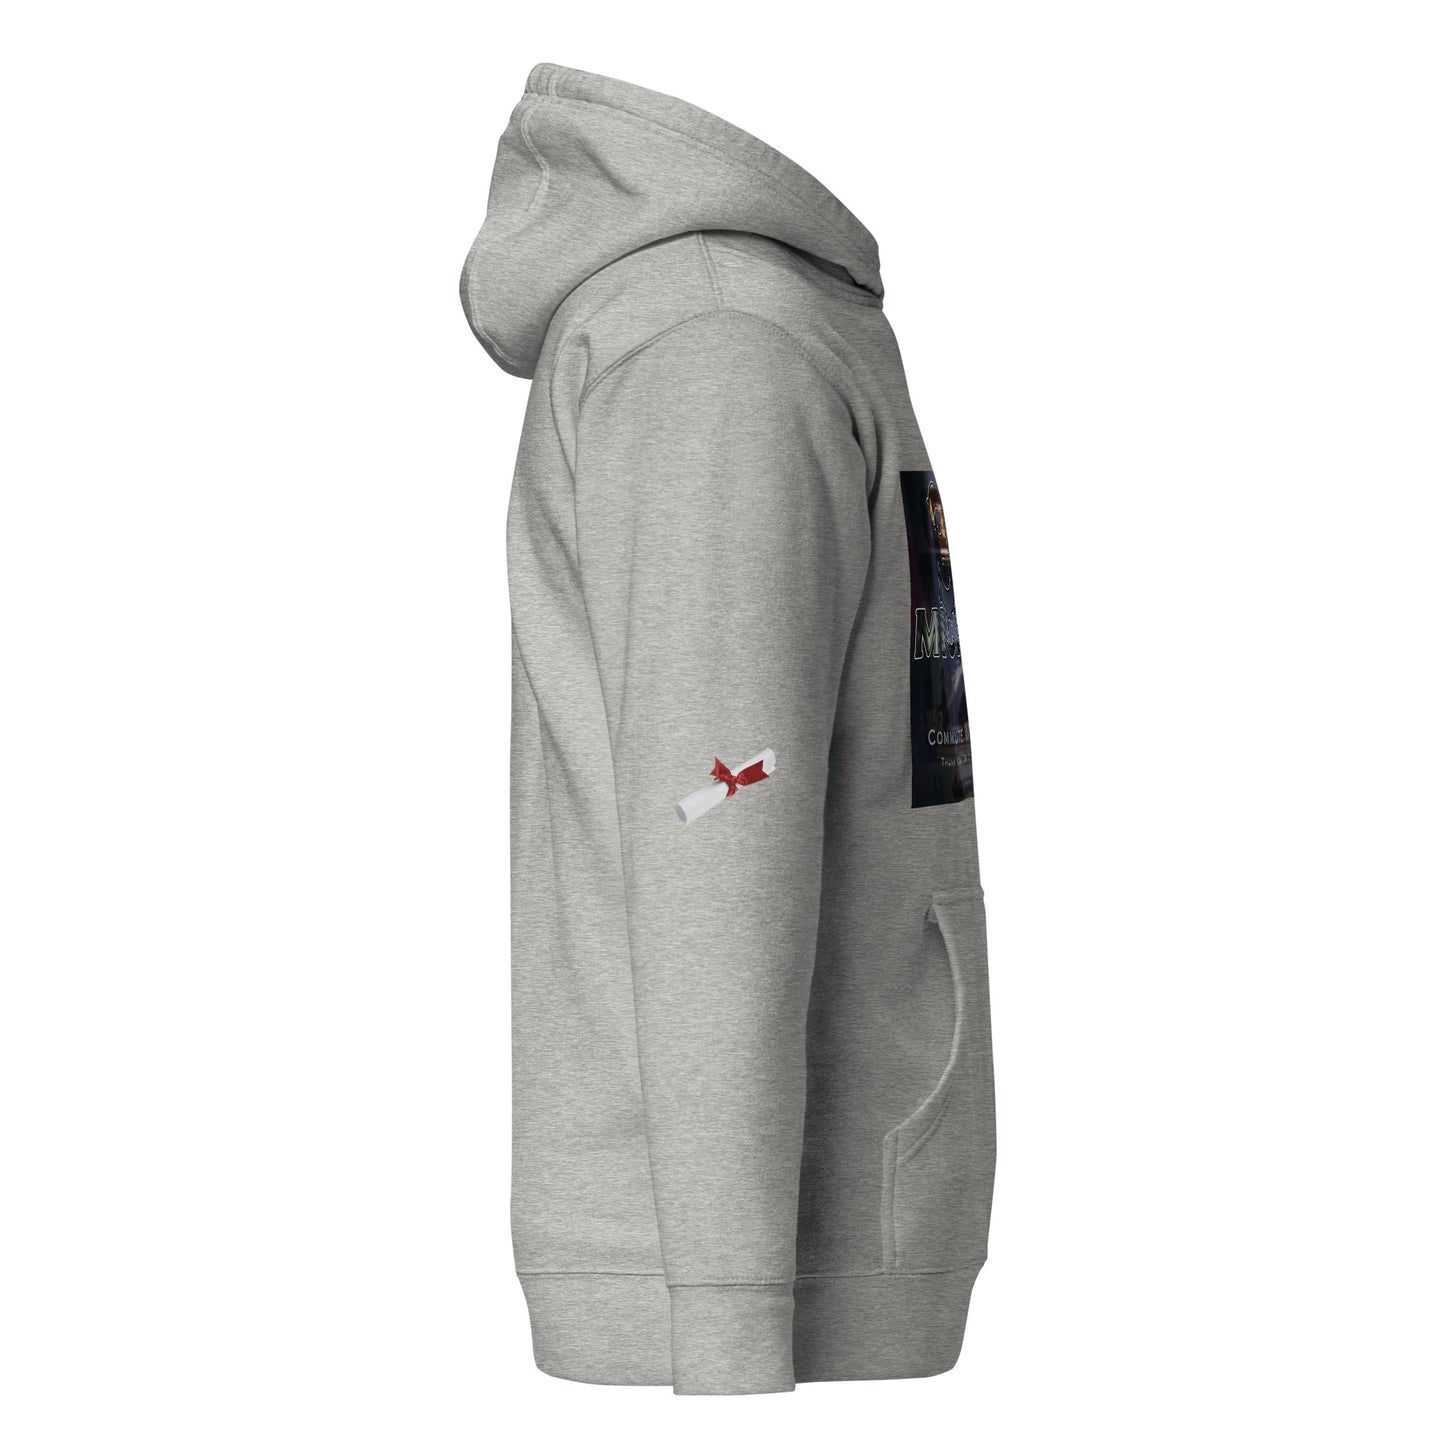 Welcome to the Southside Hoodie